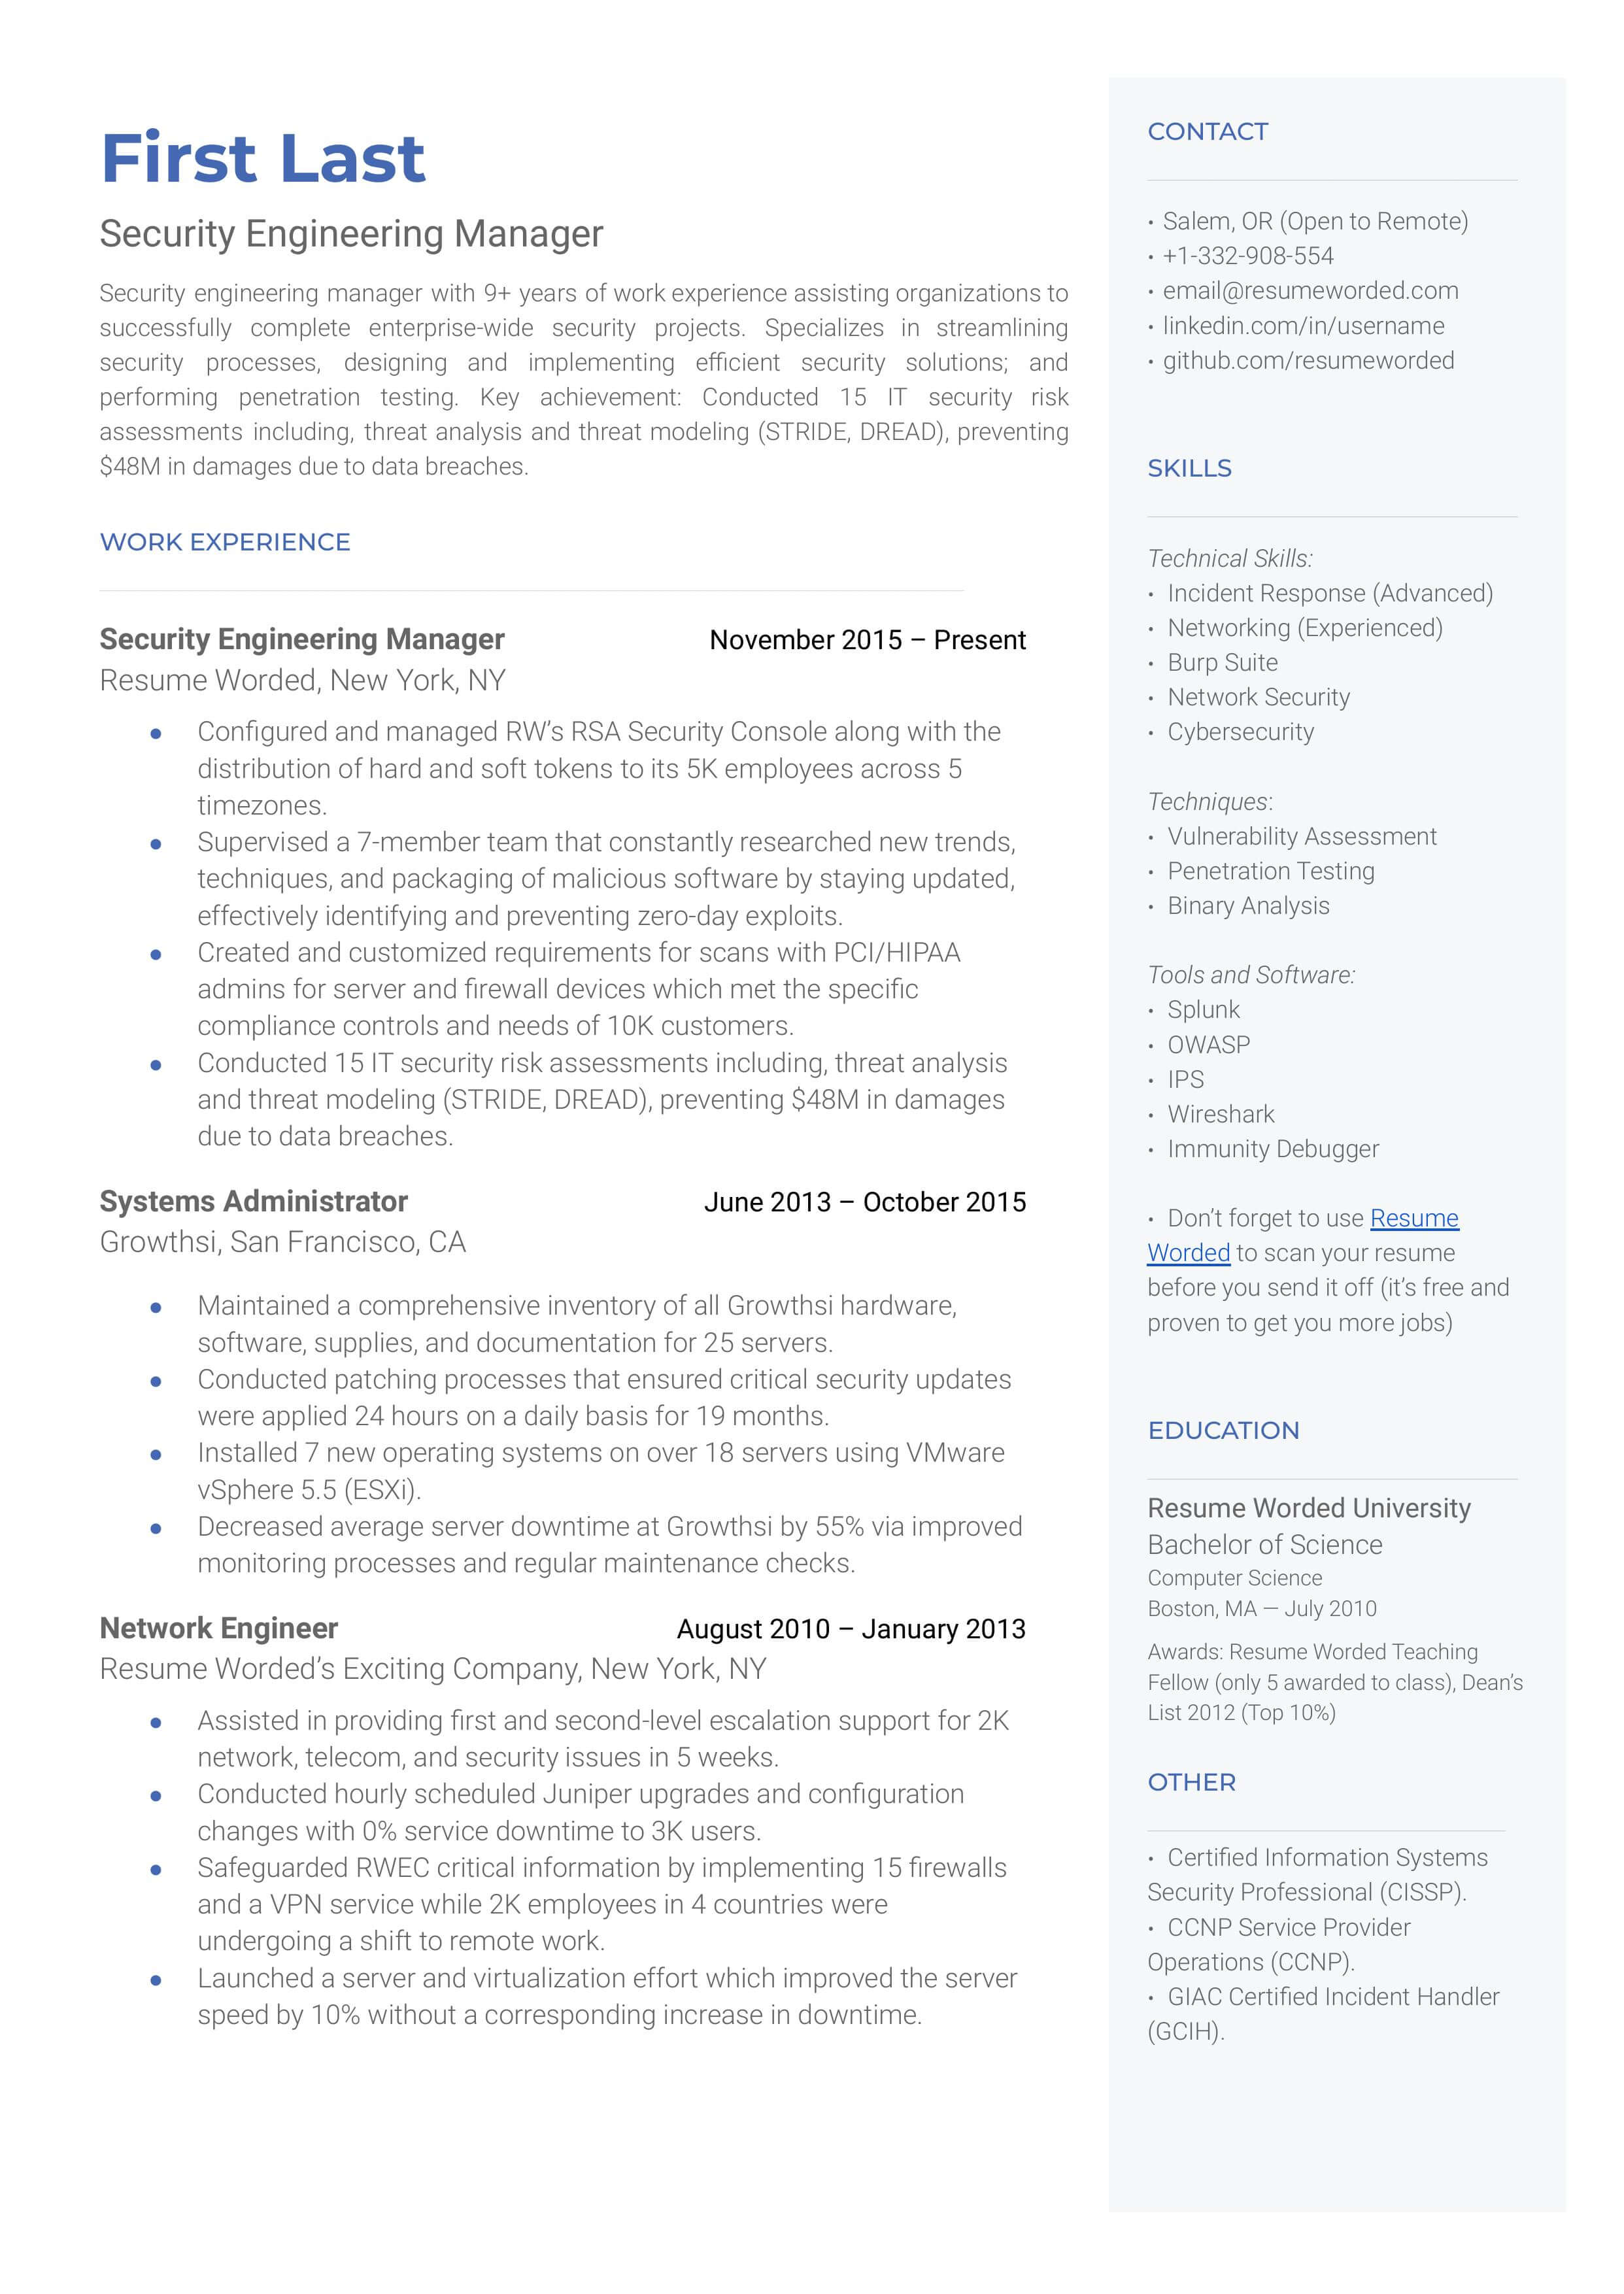 A well-structured CV for a Security Engineering Manager role.